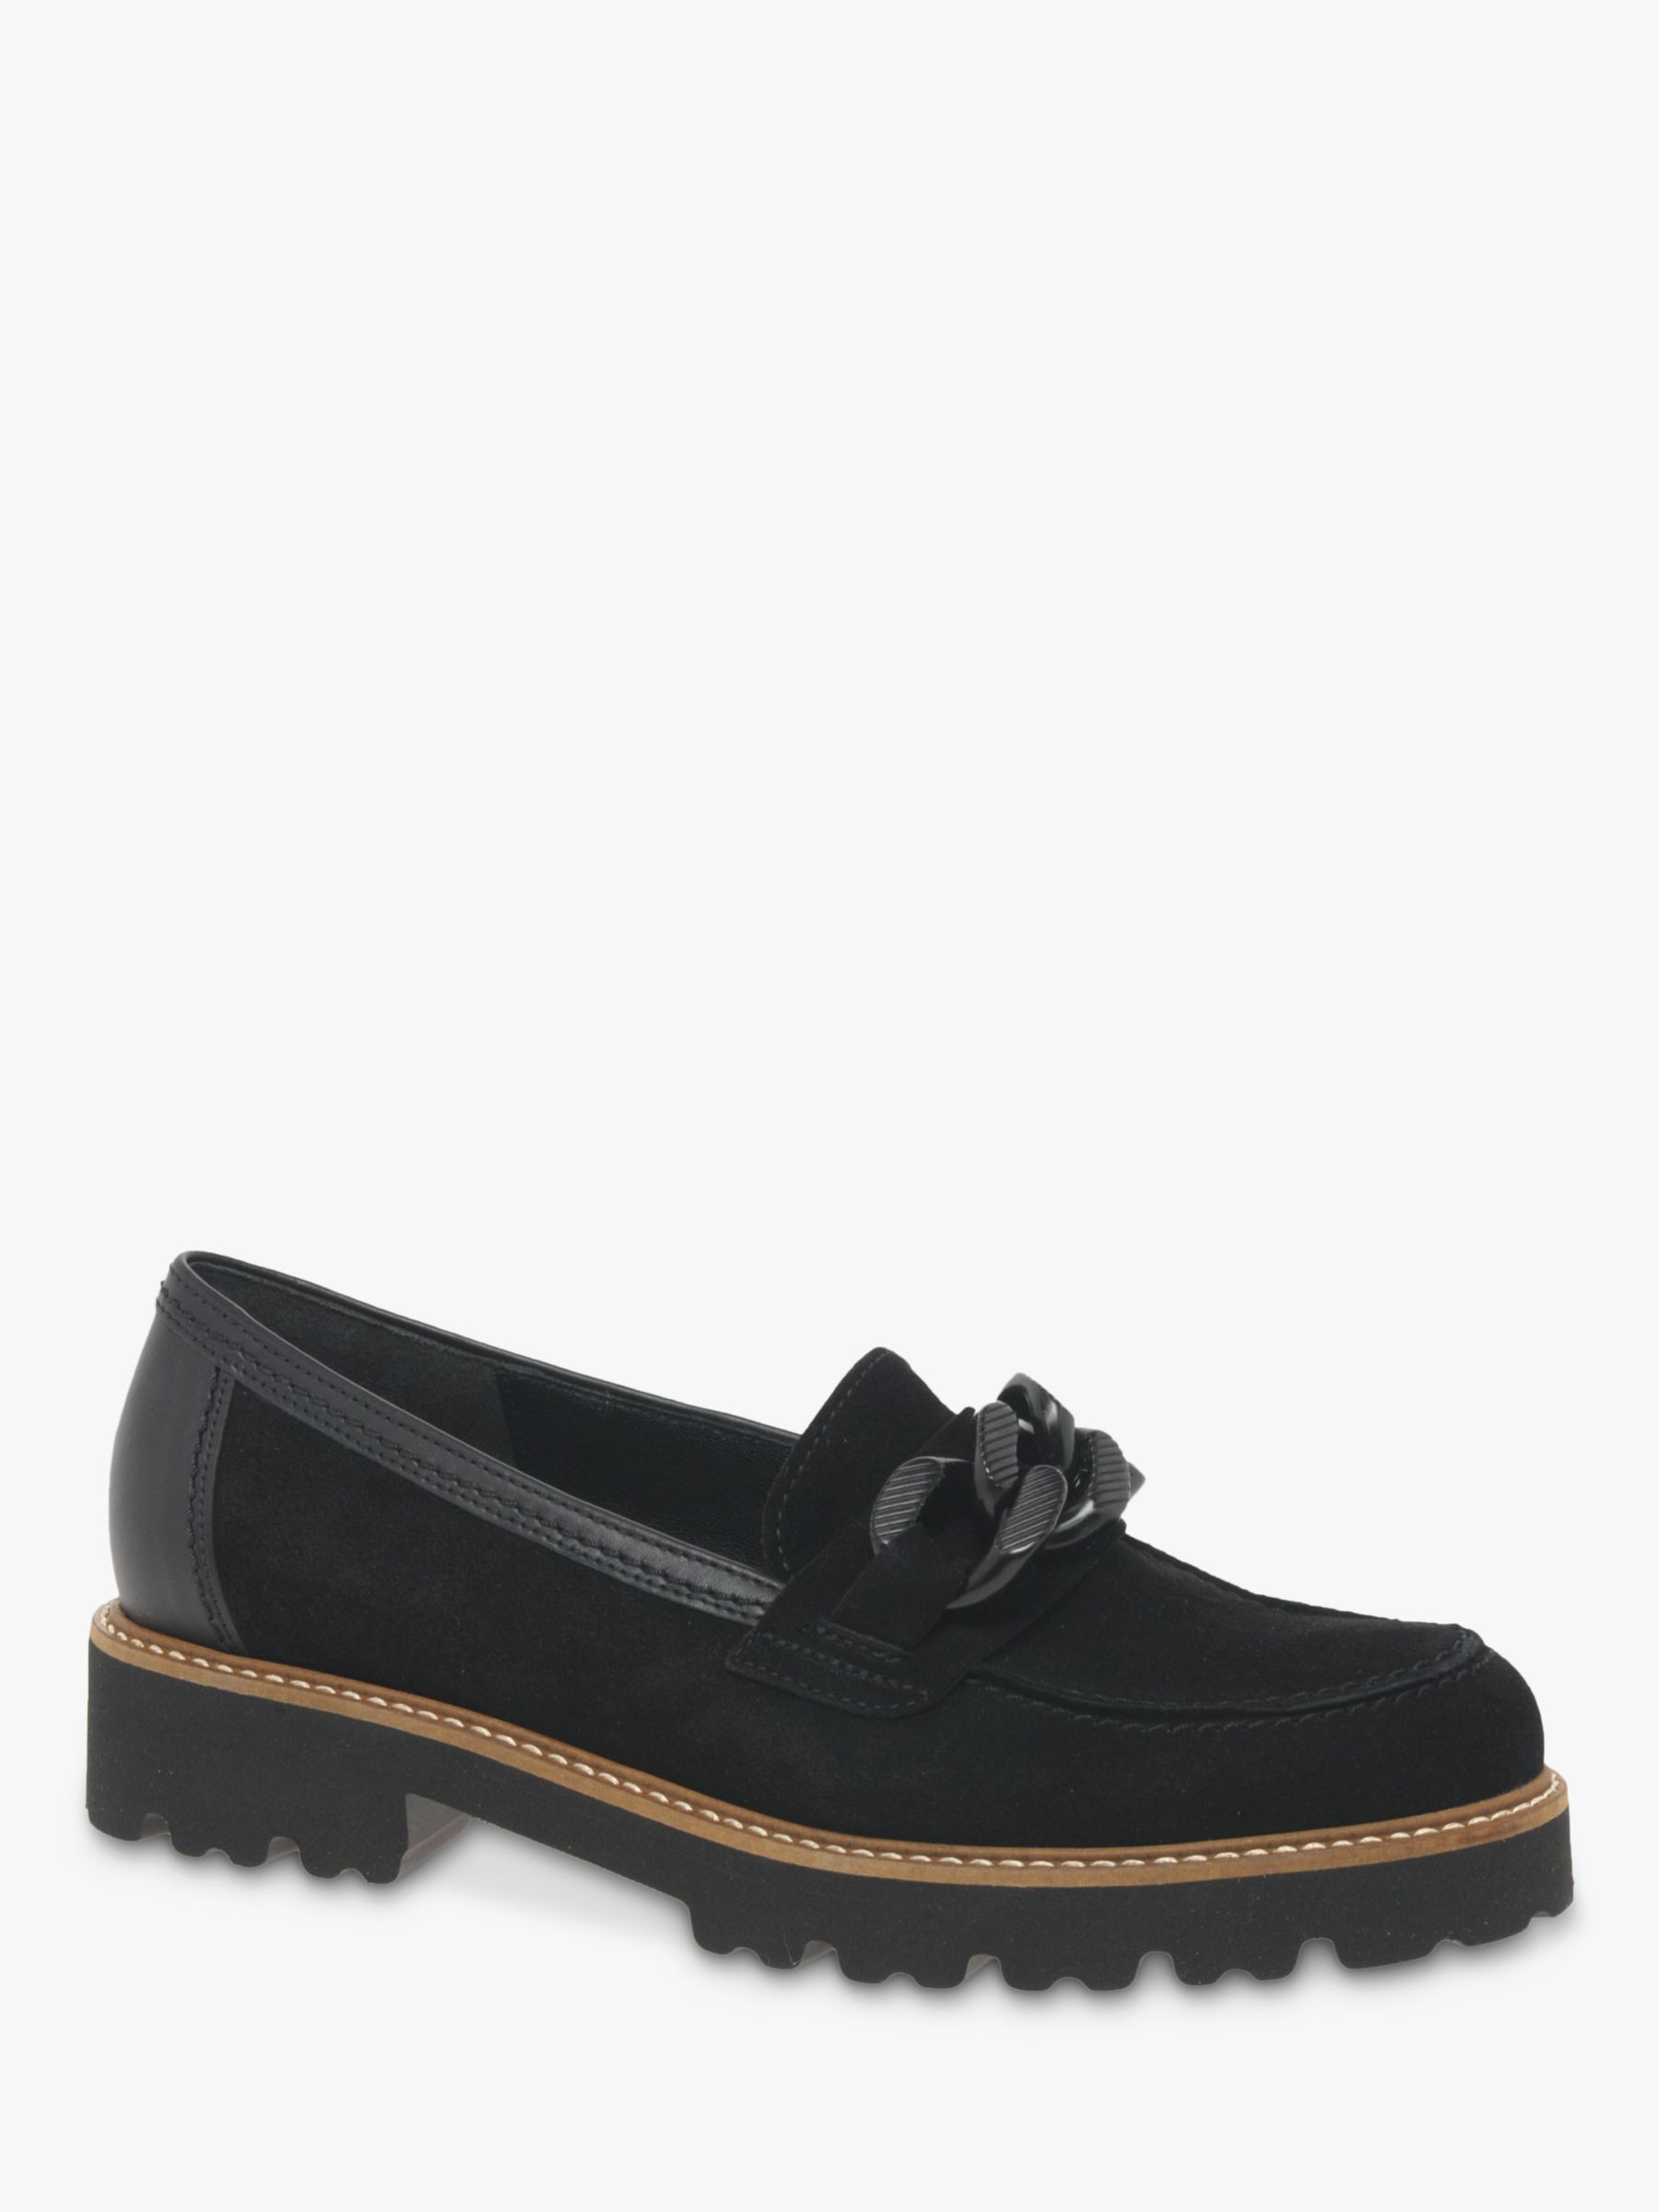 Gabor Squeeze Suede Loafers, Black at John Lewis & Partners